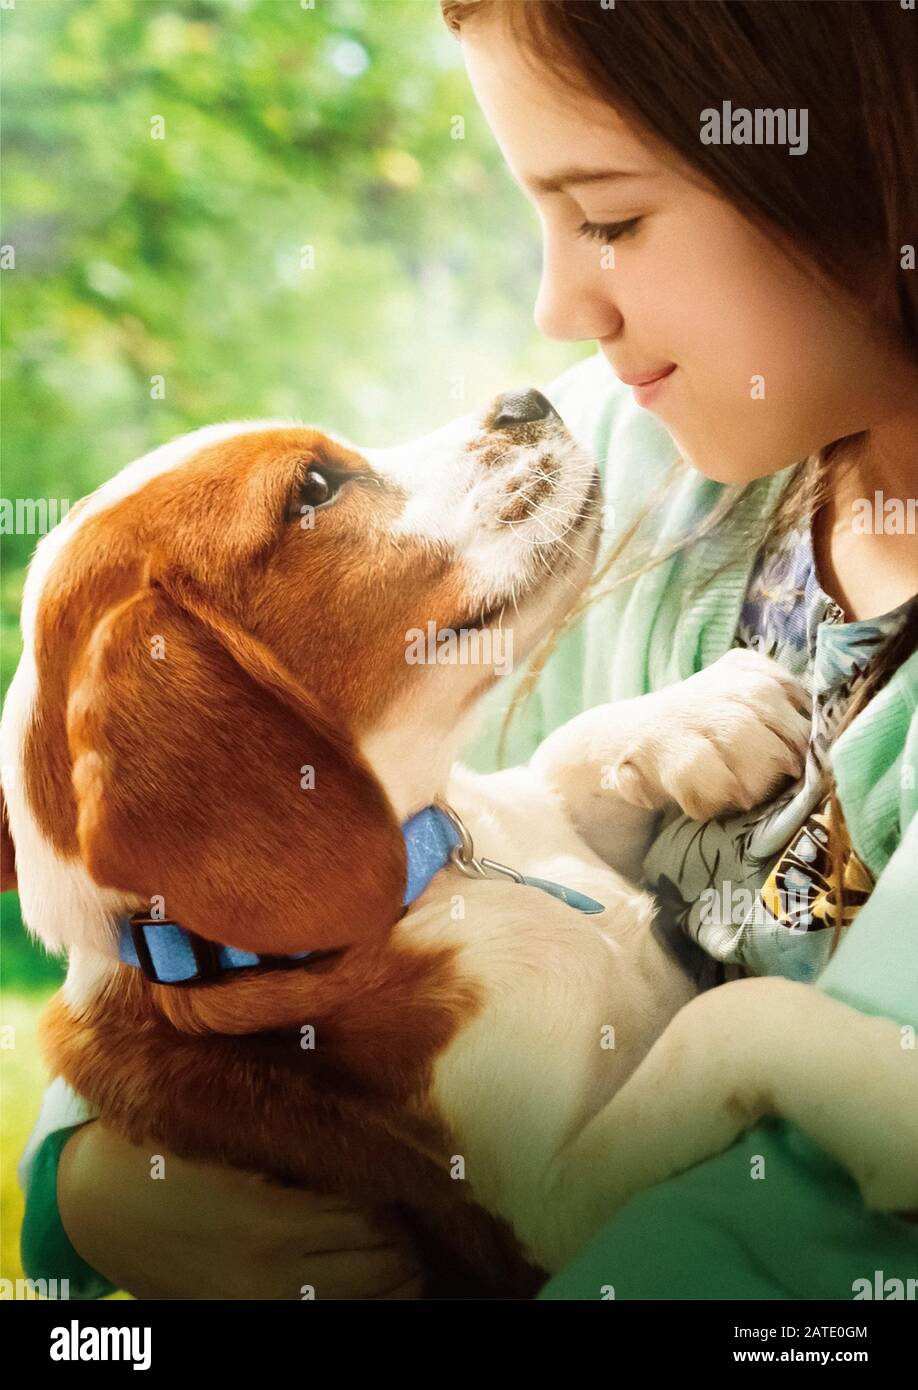 KATHRYN PRESCOTT in A DOG'S JOURNEY (2019), directed by GAIL MANCUSO. Credit: UNIVERSAL INTERNATIONAL PICTURES / Album Stock Photo